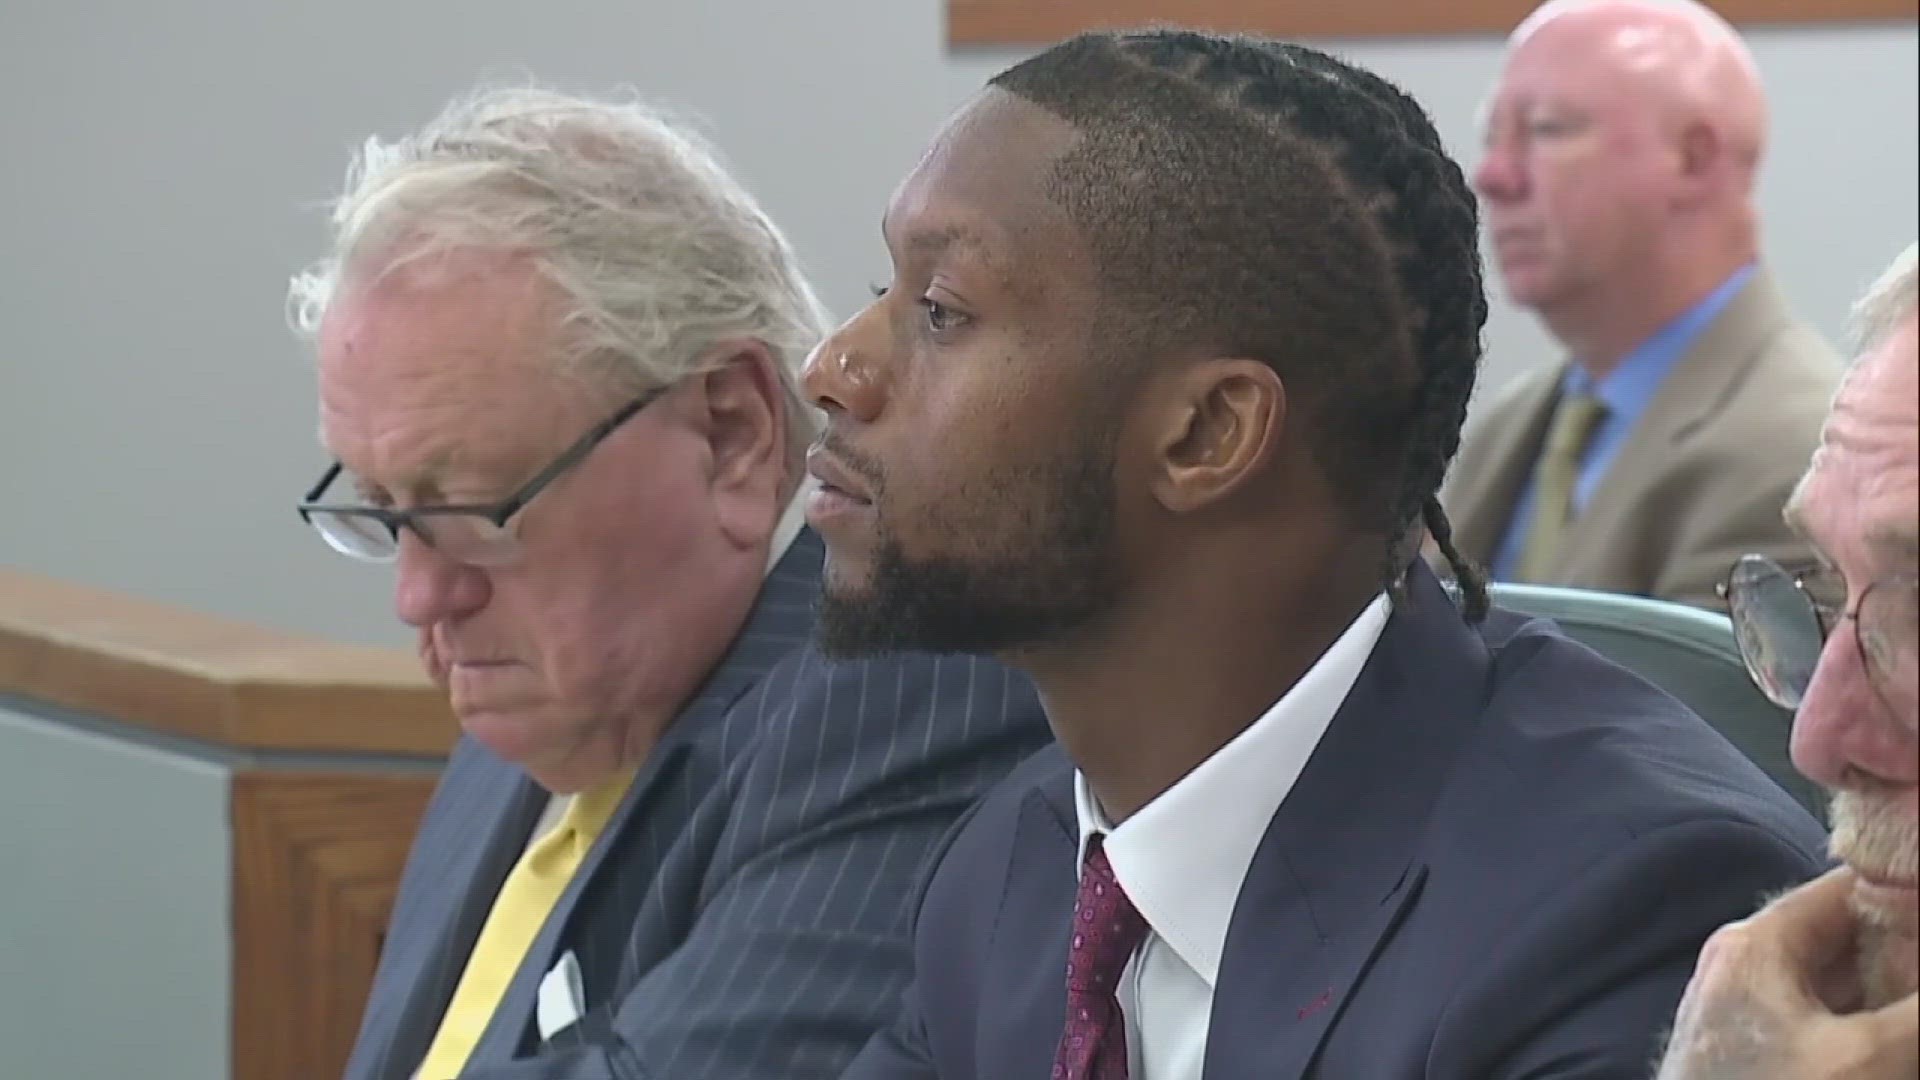 A judge found Mixon not guilty of aggravated menacing, a misdemeanor, following a four-day bench trial.